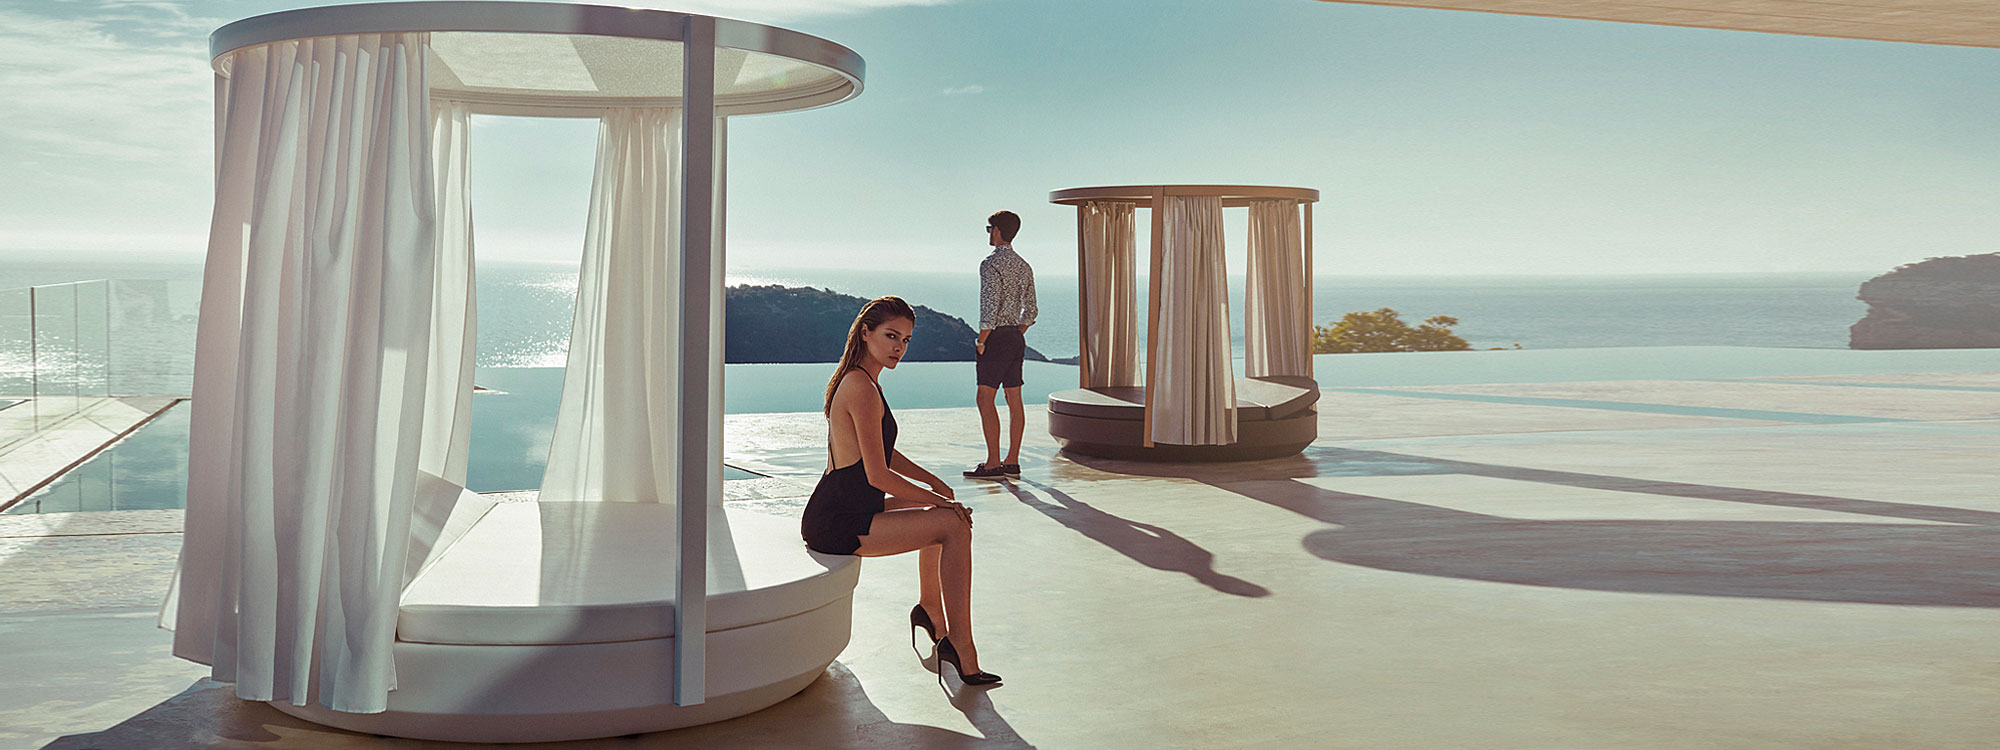 Image of pair of circular Vondom Vela daybeds with integrated pergolas and curtains, shown in late afternoon sun on balcony with hills and sea in the background